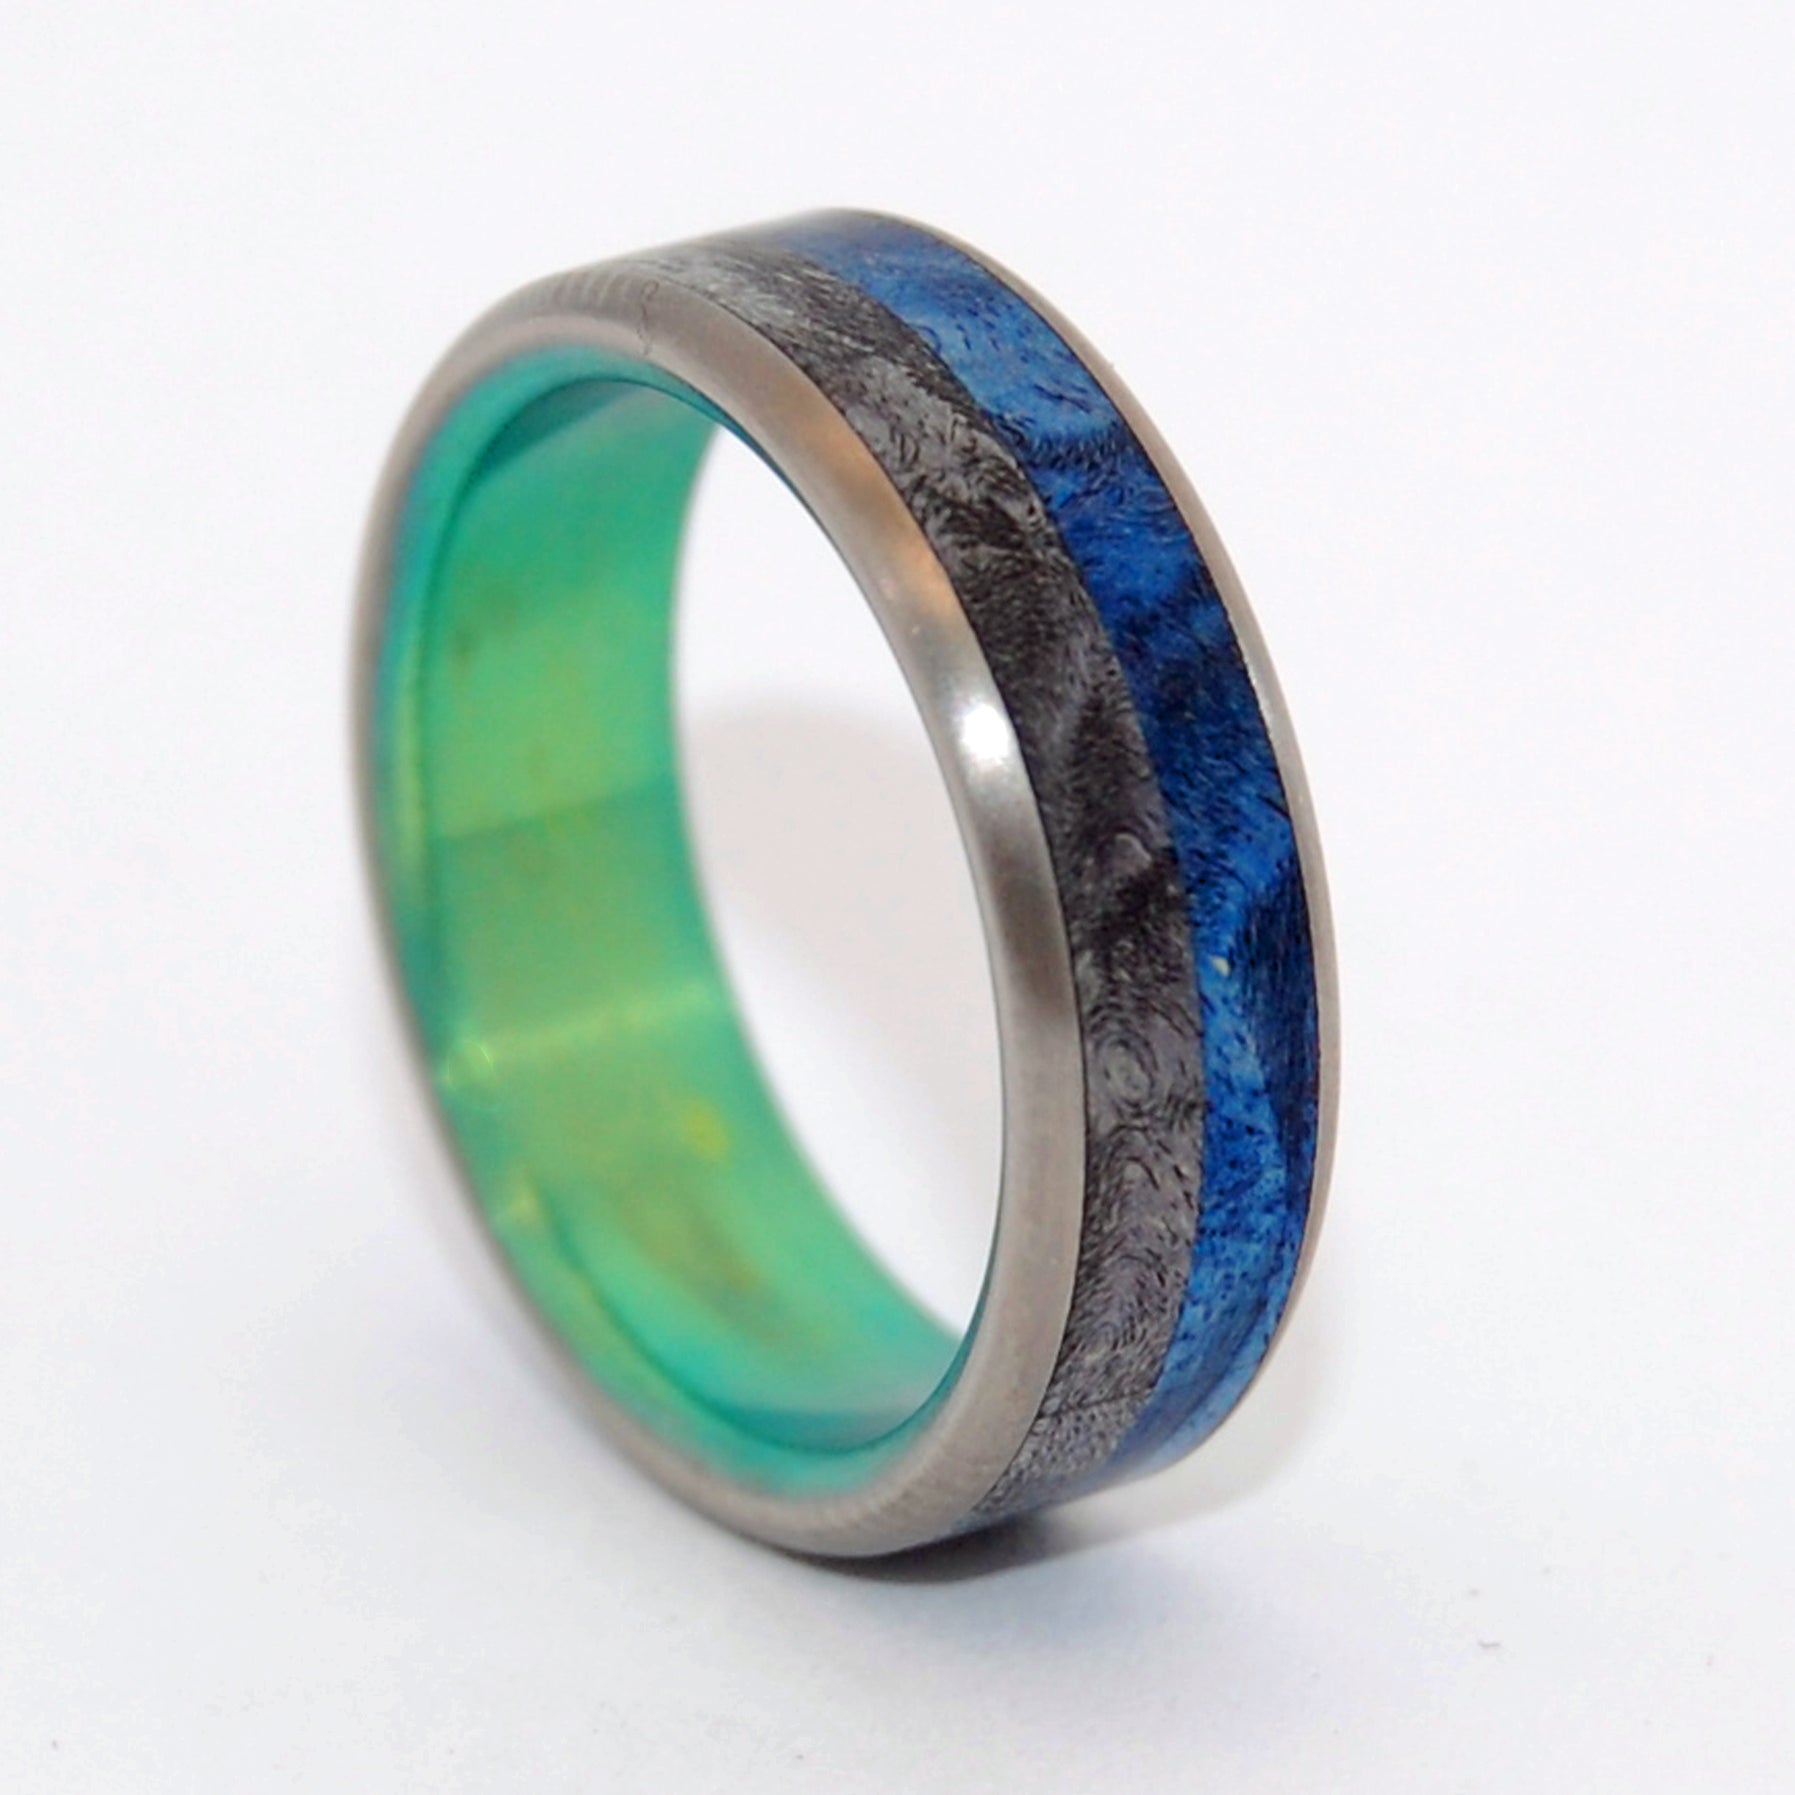 With You | Wood and Titanium Wedding Ring - Minter and Richter Designs